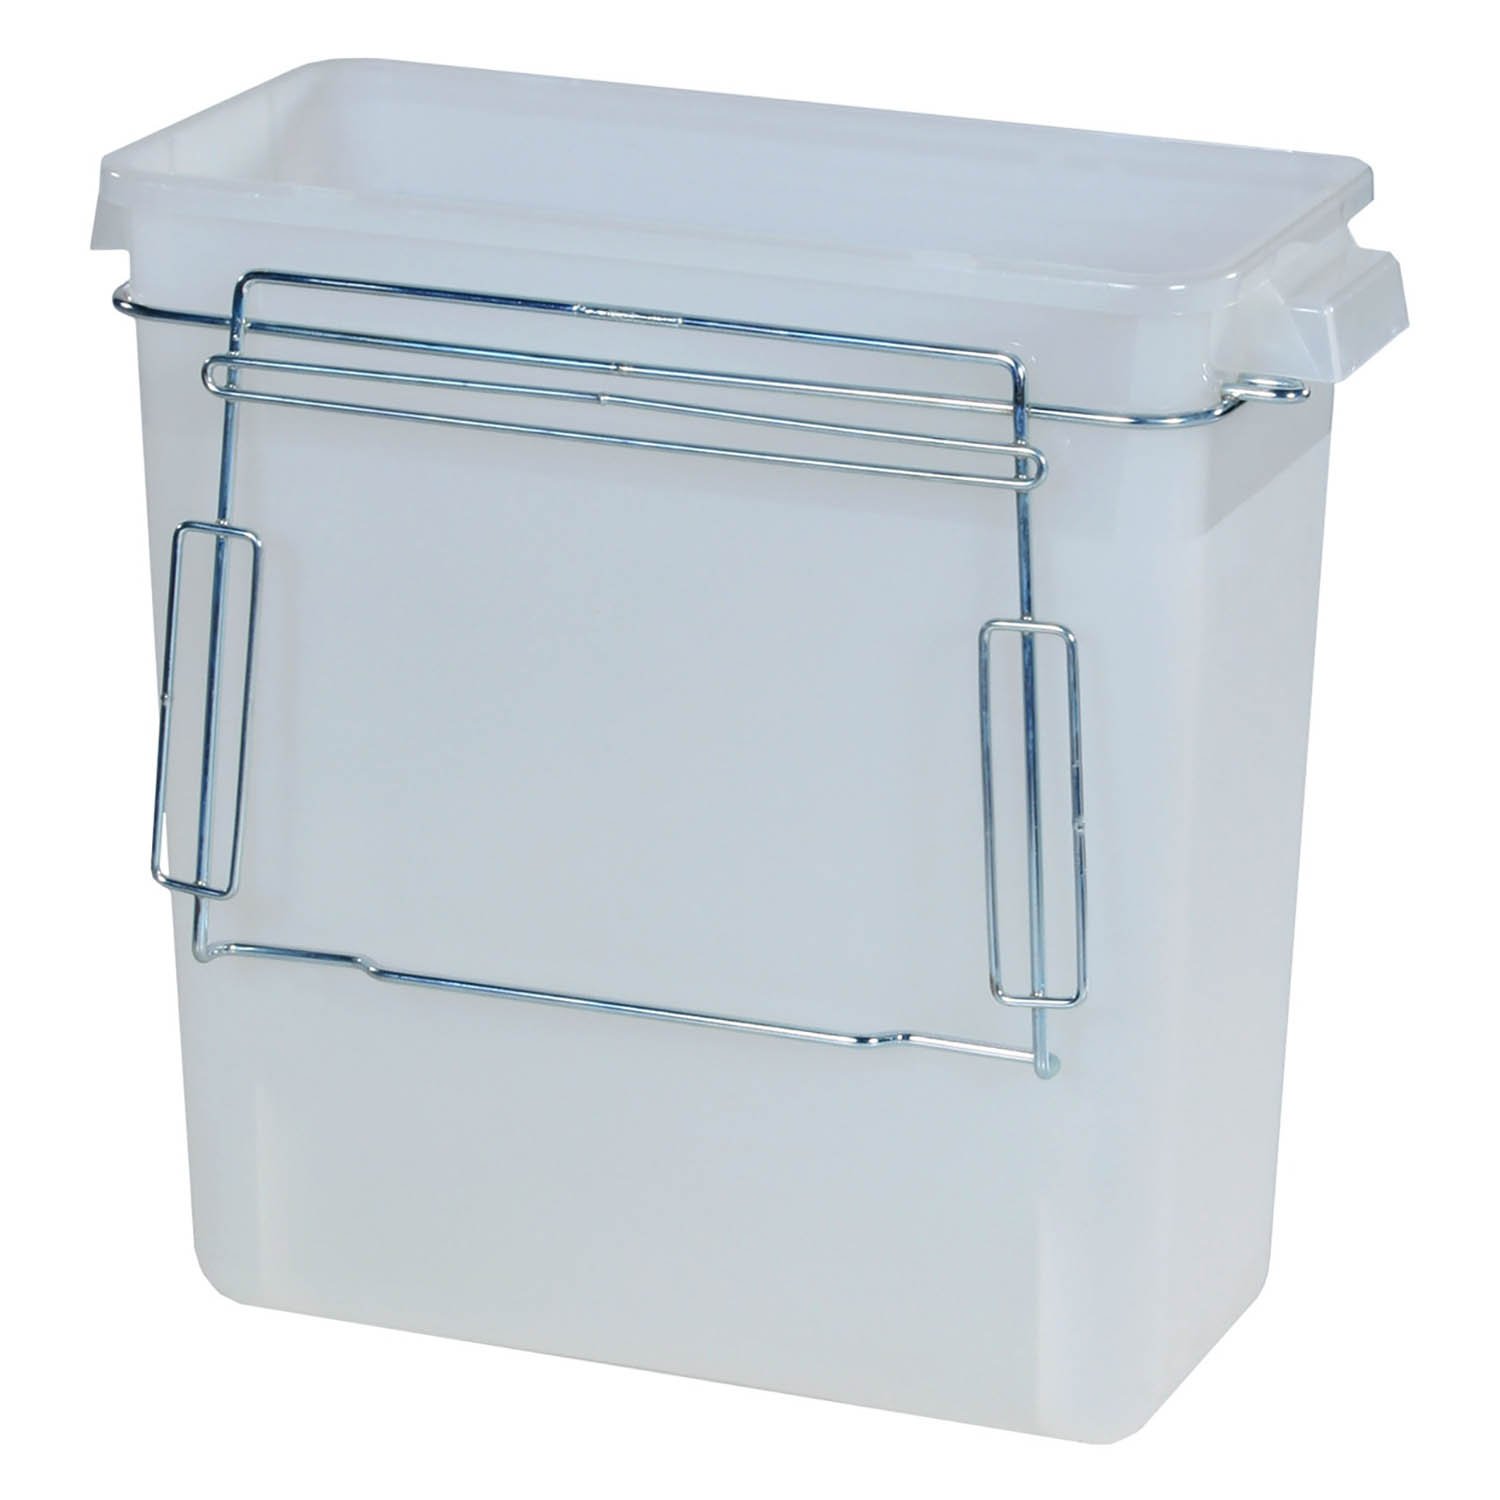 https://www.universalmedicalinc.com/media/catalog/product/cache/396fa530d5fa12bef36f4c19de24af0a/6/8/684801_three-gallon-plastic-waste-container-mounting-bracket-without-cover_7.jpg